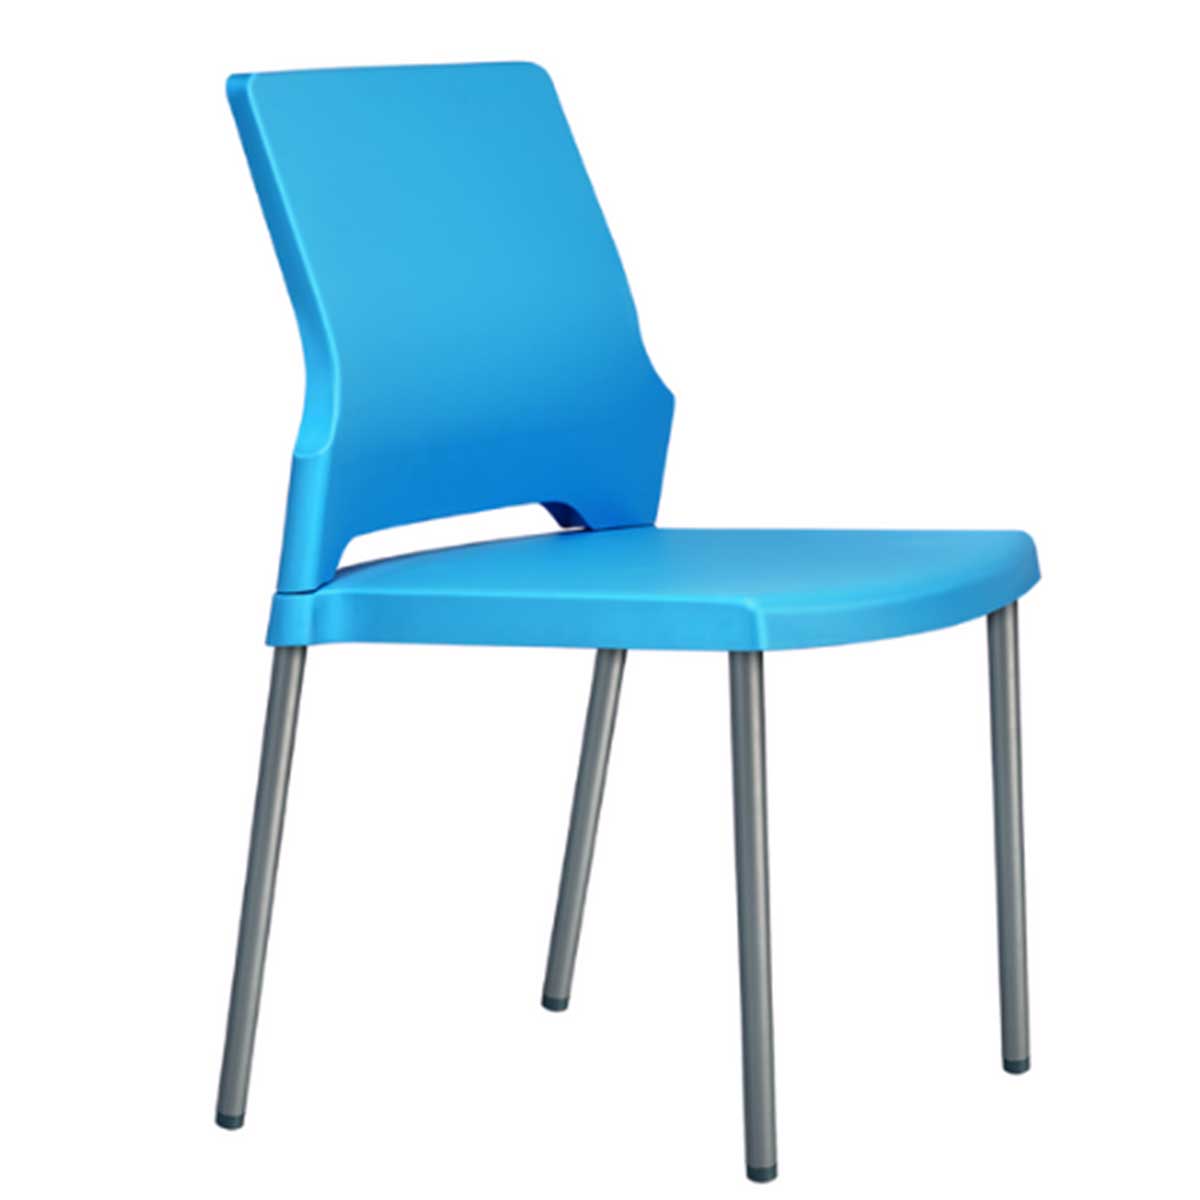 Cafeteria Chair Manufacturers, Suppliers in Seelampur